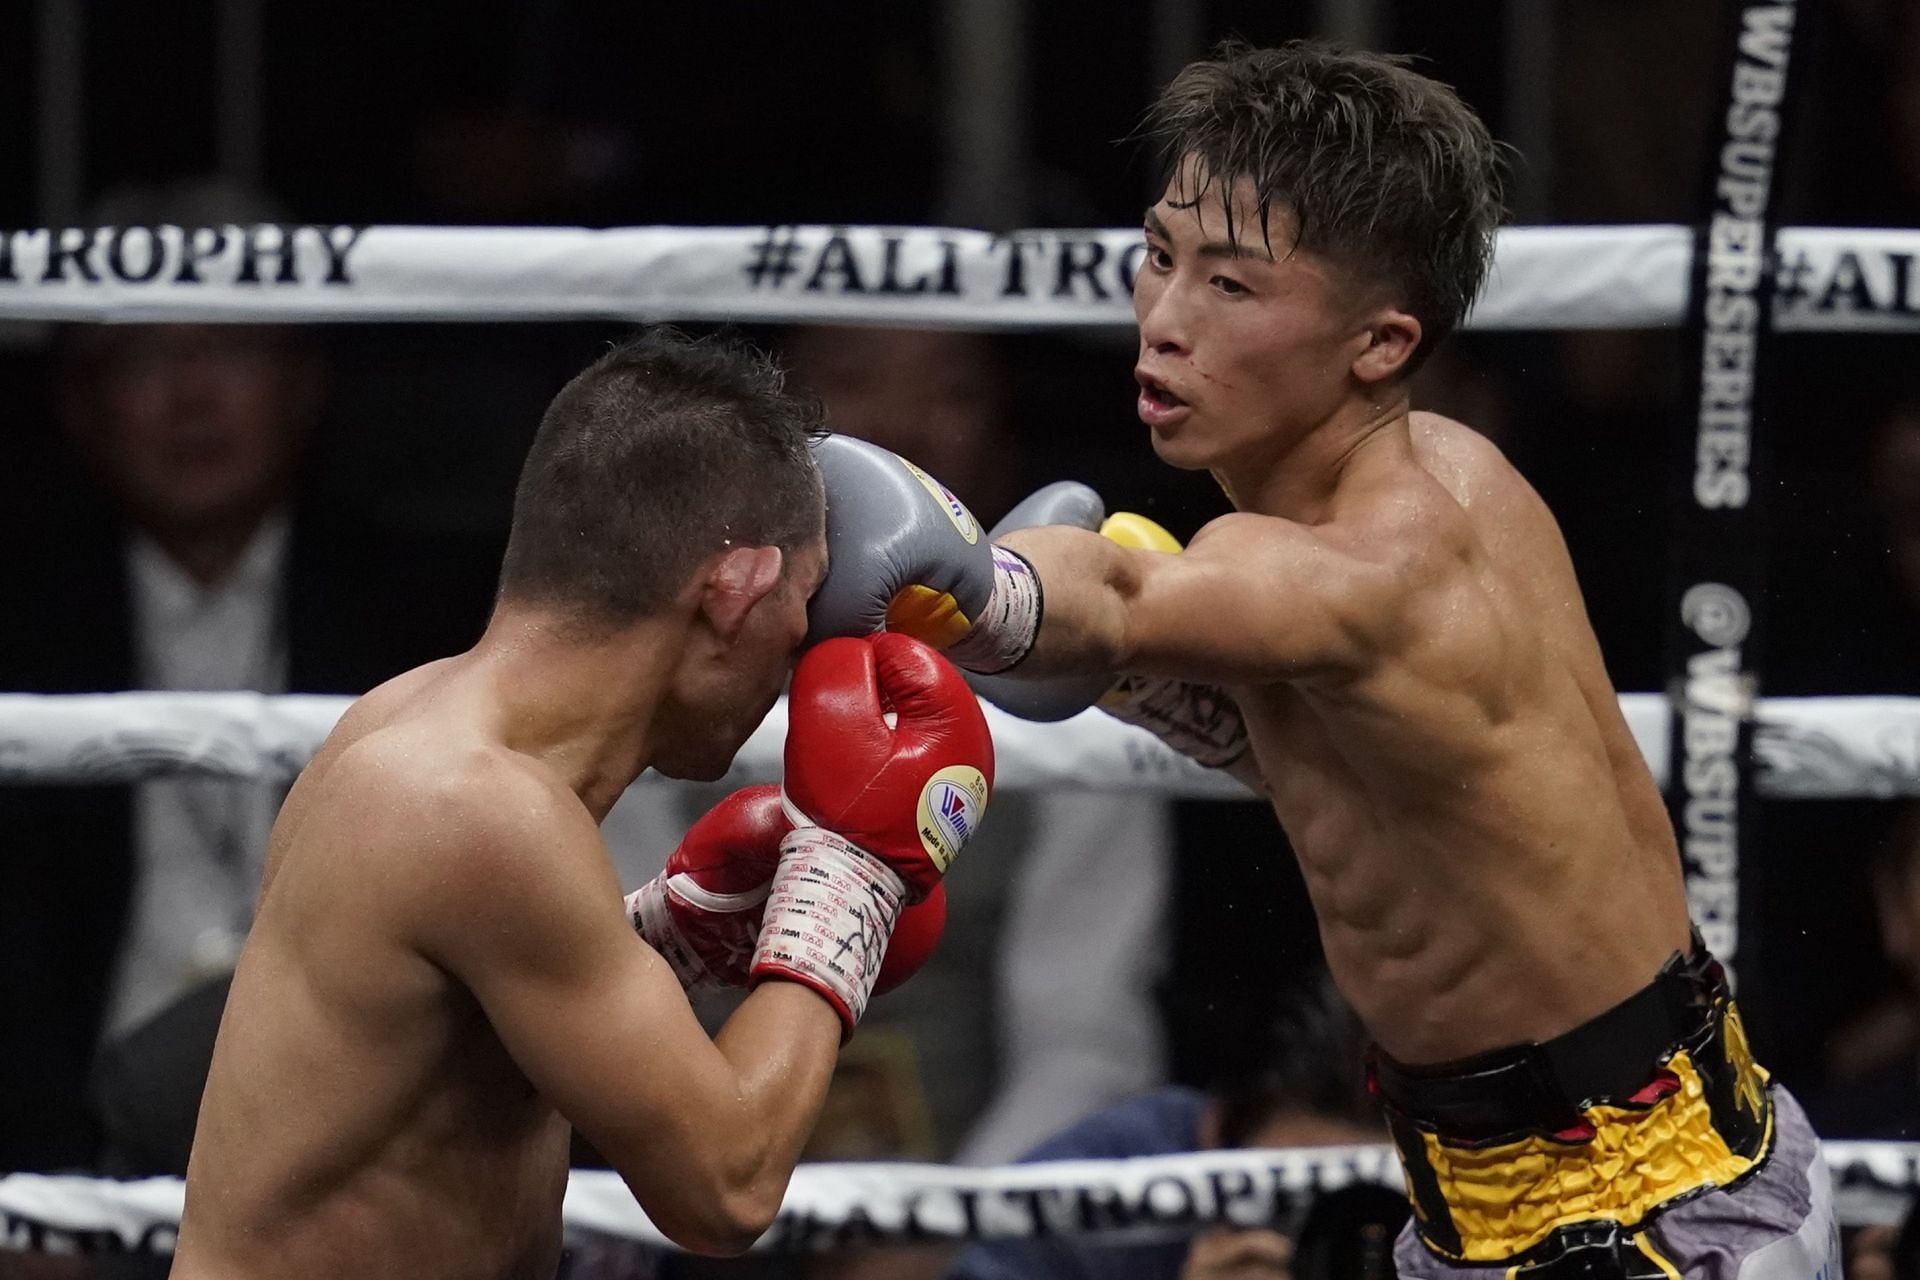 Naoya Inoue, Nonito Donaire rematch, Watch before the fight, Exciting anticipation, 1920x1280 HD Desktop